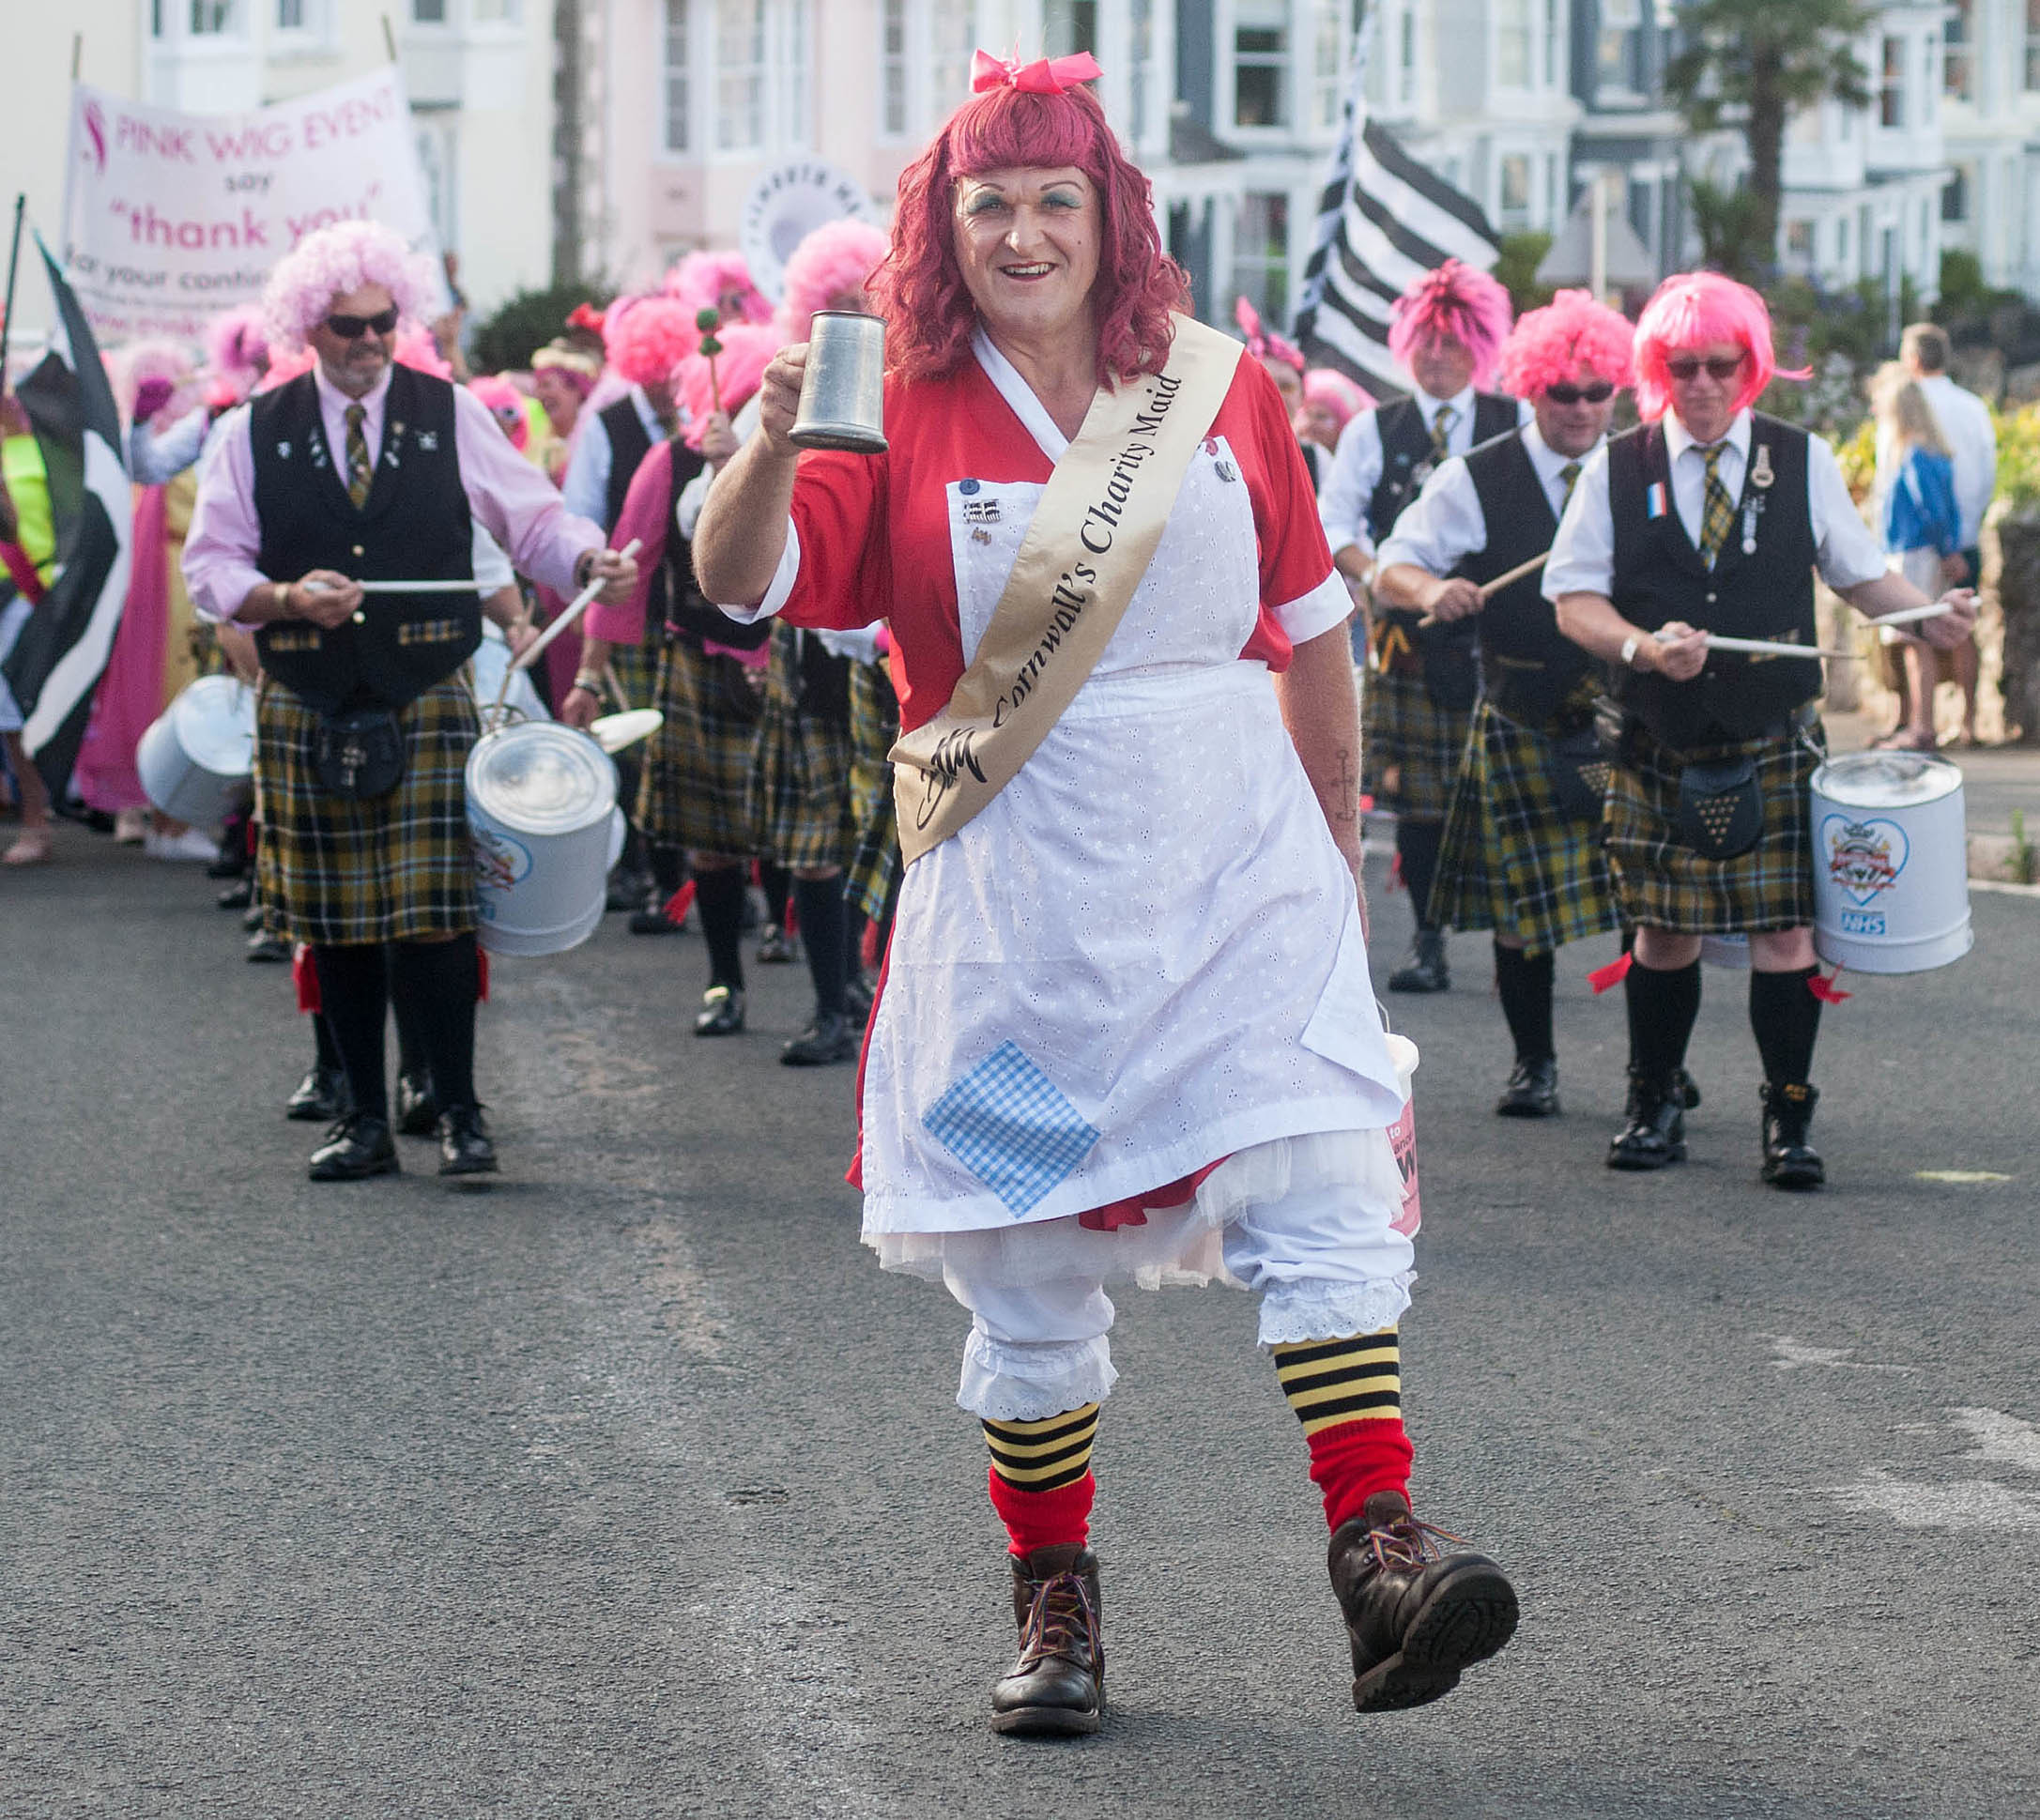 Falmouth Pink Wig Parade from the Greenbank Hotel to Church Street car park on Friday evening: The Falmouth Marine Band and Betty Stogs leads the parade. Picture by Colin Higgs